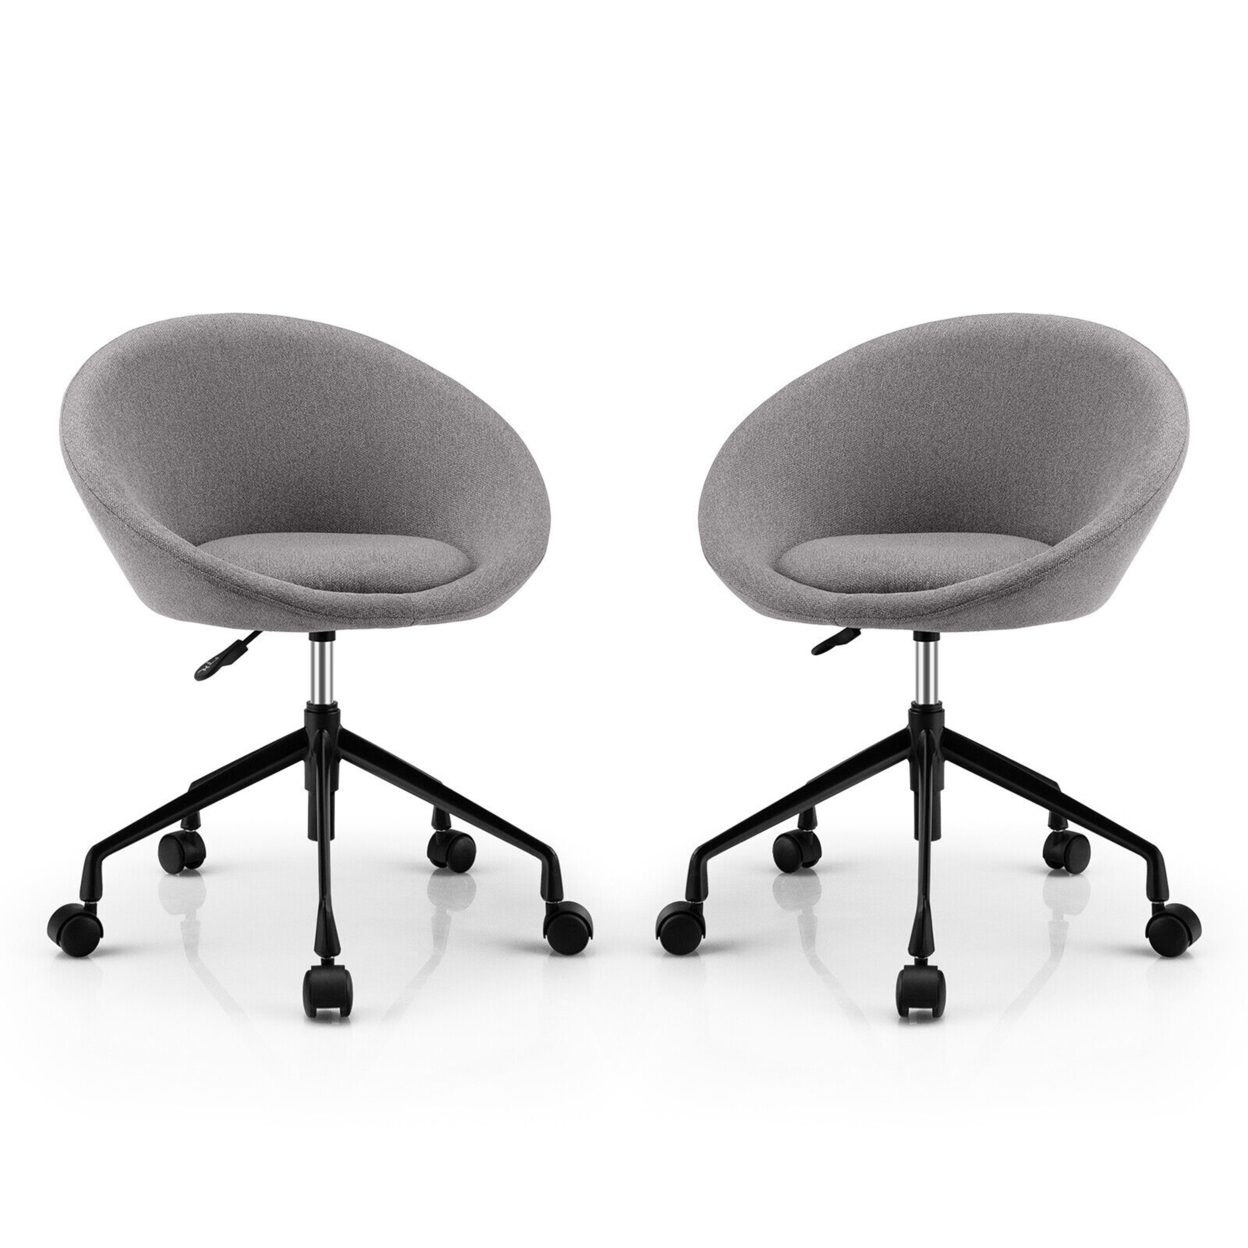 Set Of 2 Swivel Home Office Chair Adjustable Accent Chair W/ Flexible Casters - Grey